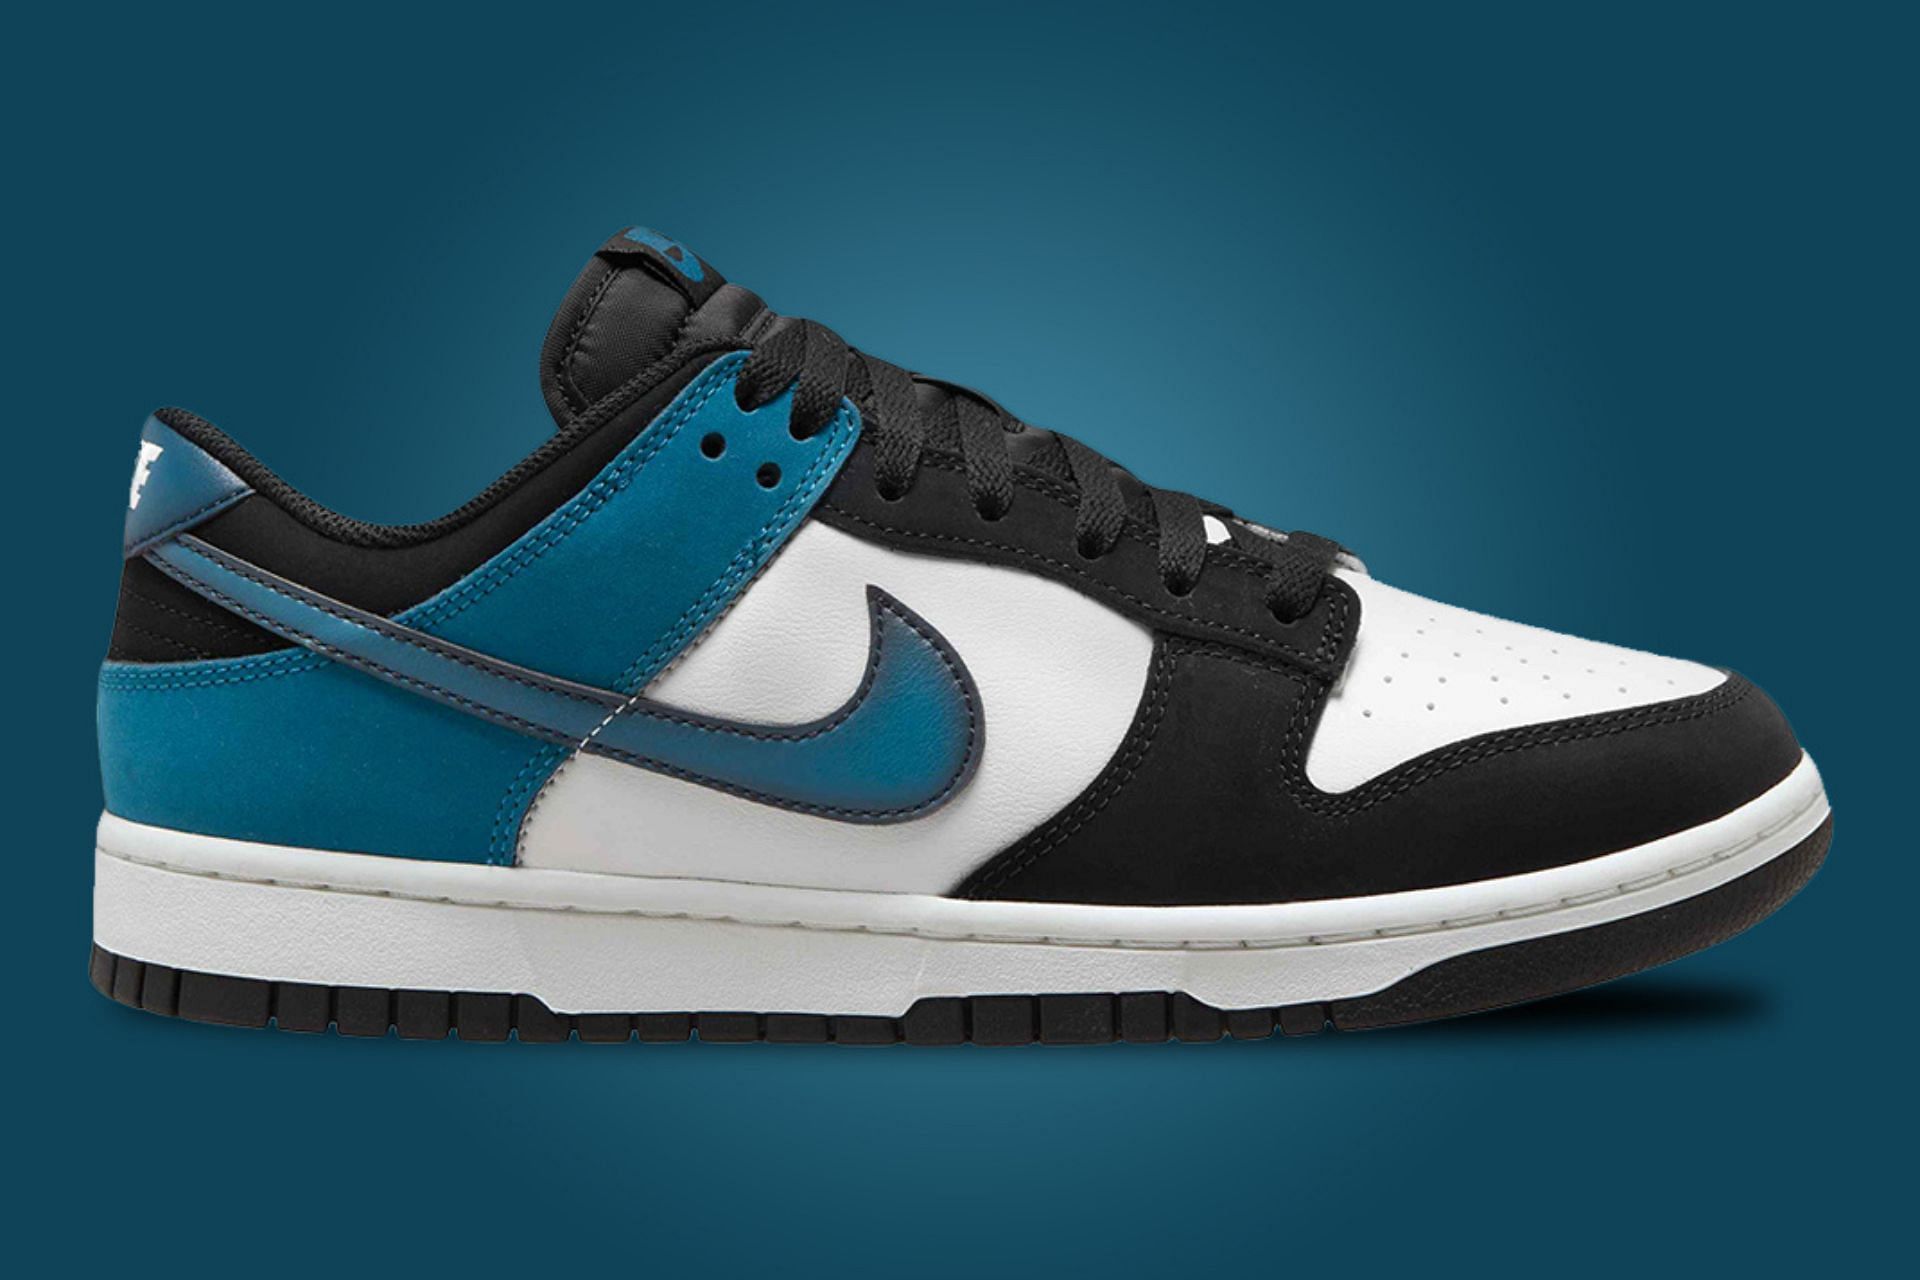 profiel Zin Anoniem Nike Dunk Low “Black Industrial Blue” shoes: Where to buy, price, and more  details explored